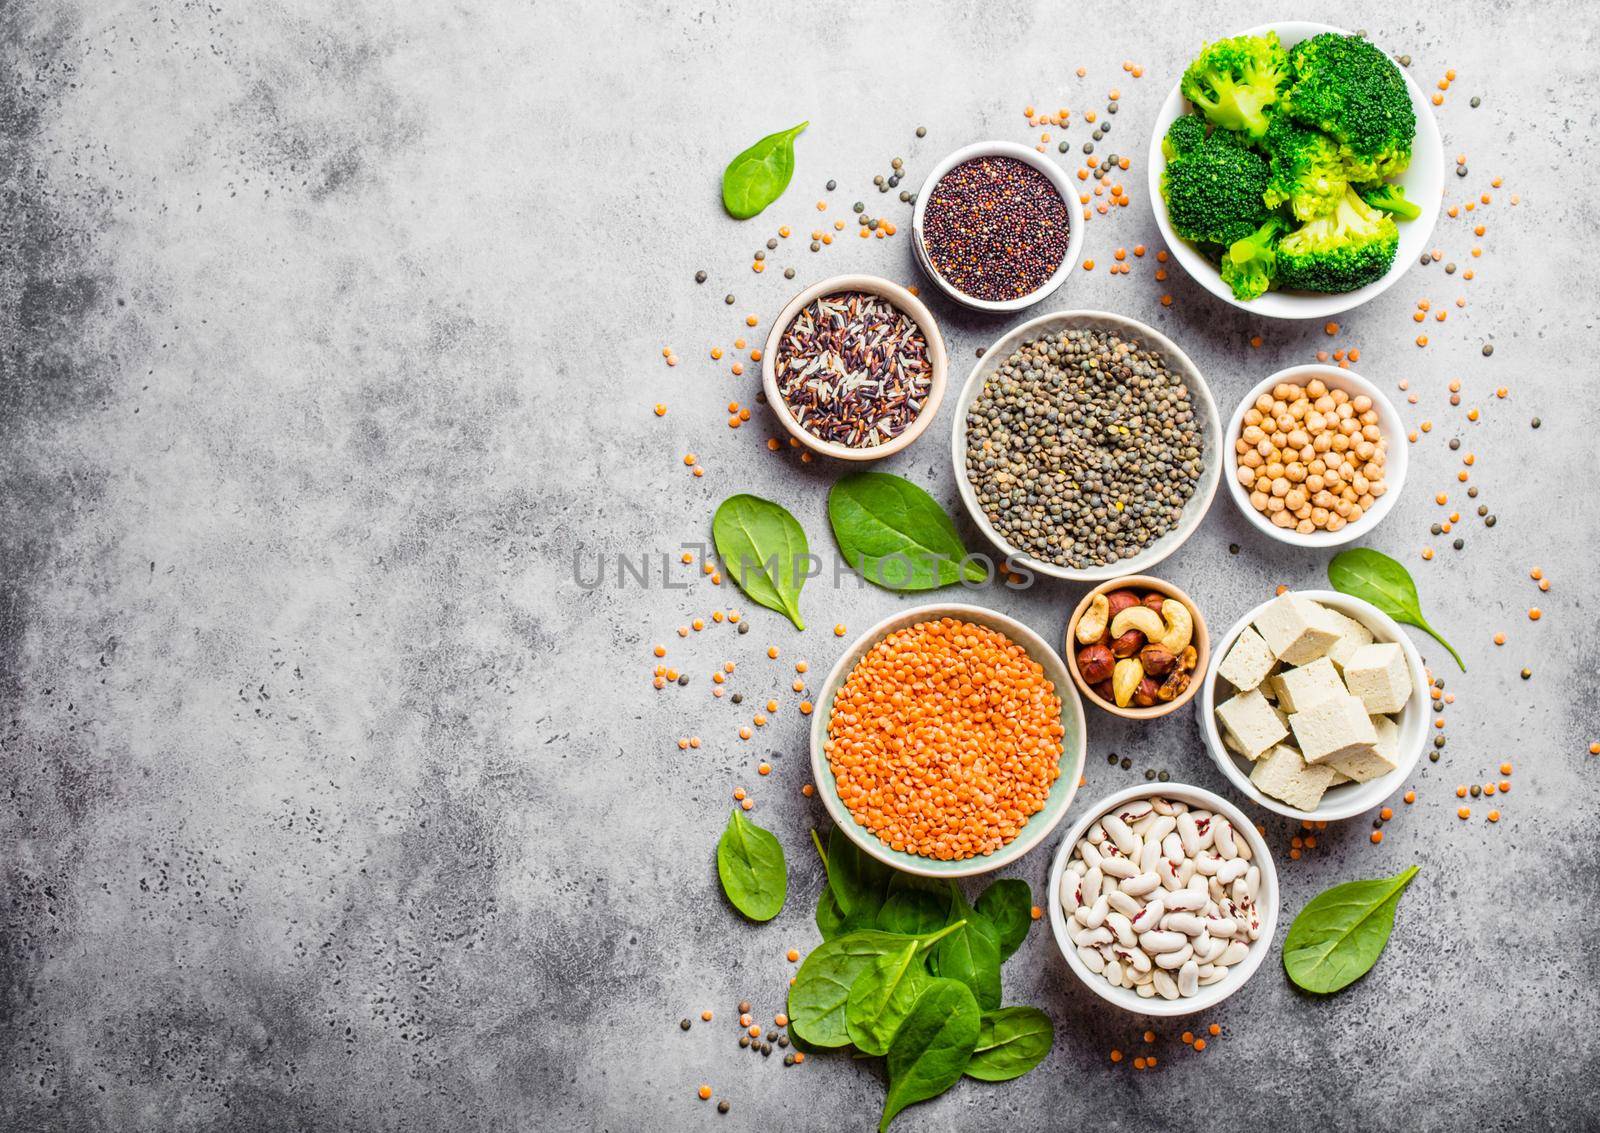 Top view of different vegan protein sources with space for text: beans, lentils, quinoa, tofu, vegetables, nuts, chickpeas, rice, stone background. Healthy balanced vegetarian nutrition for vegans